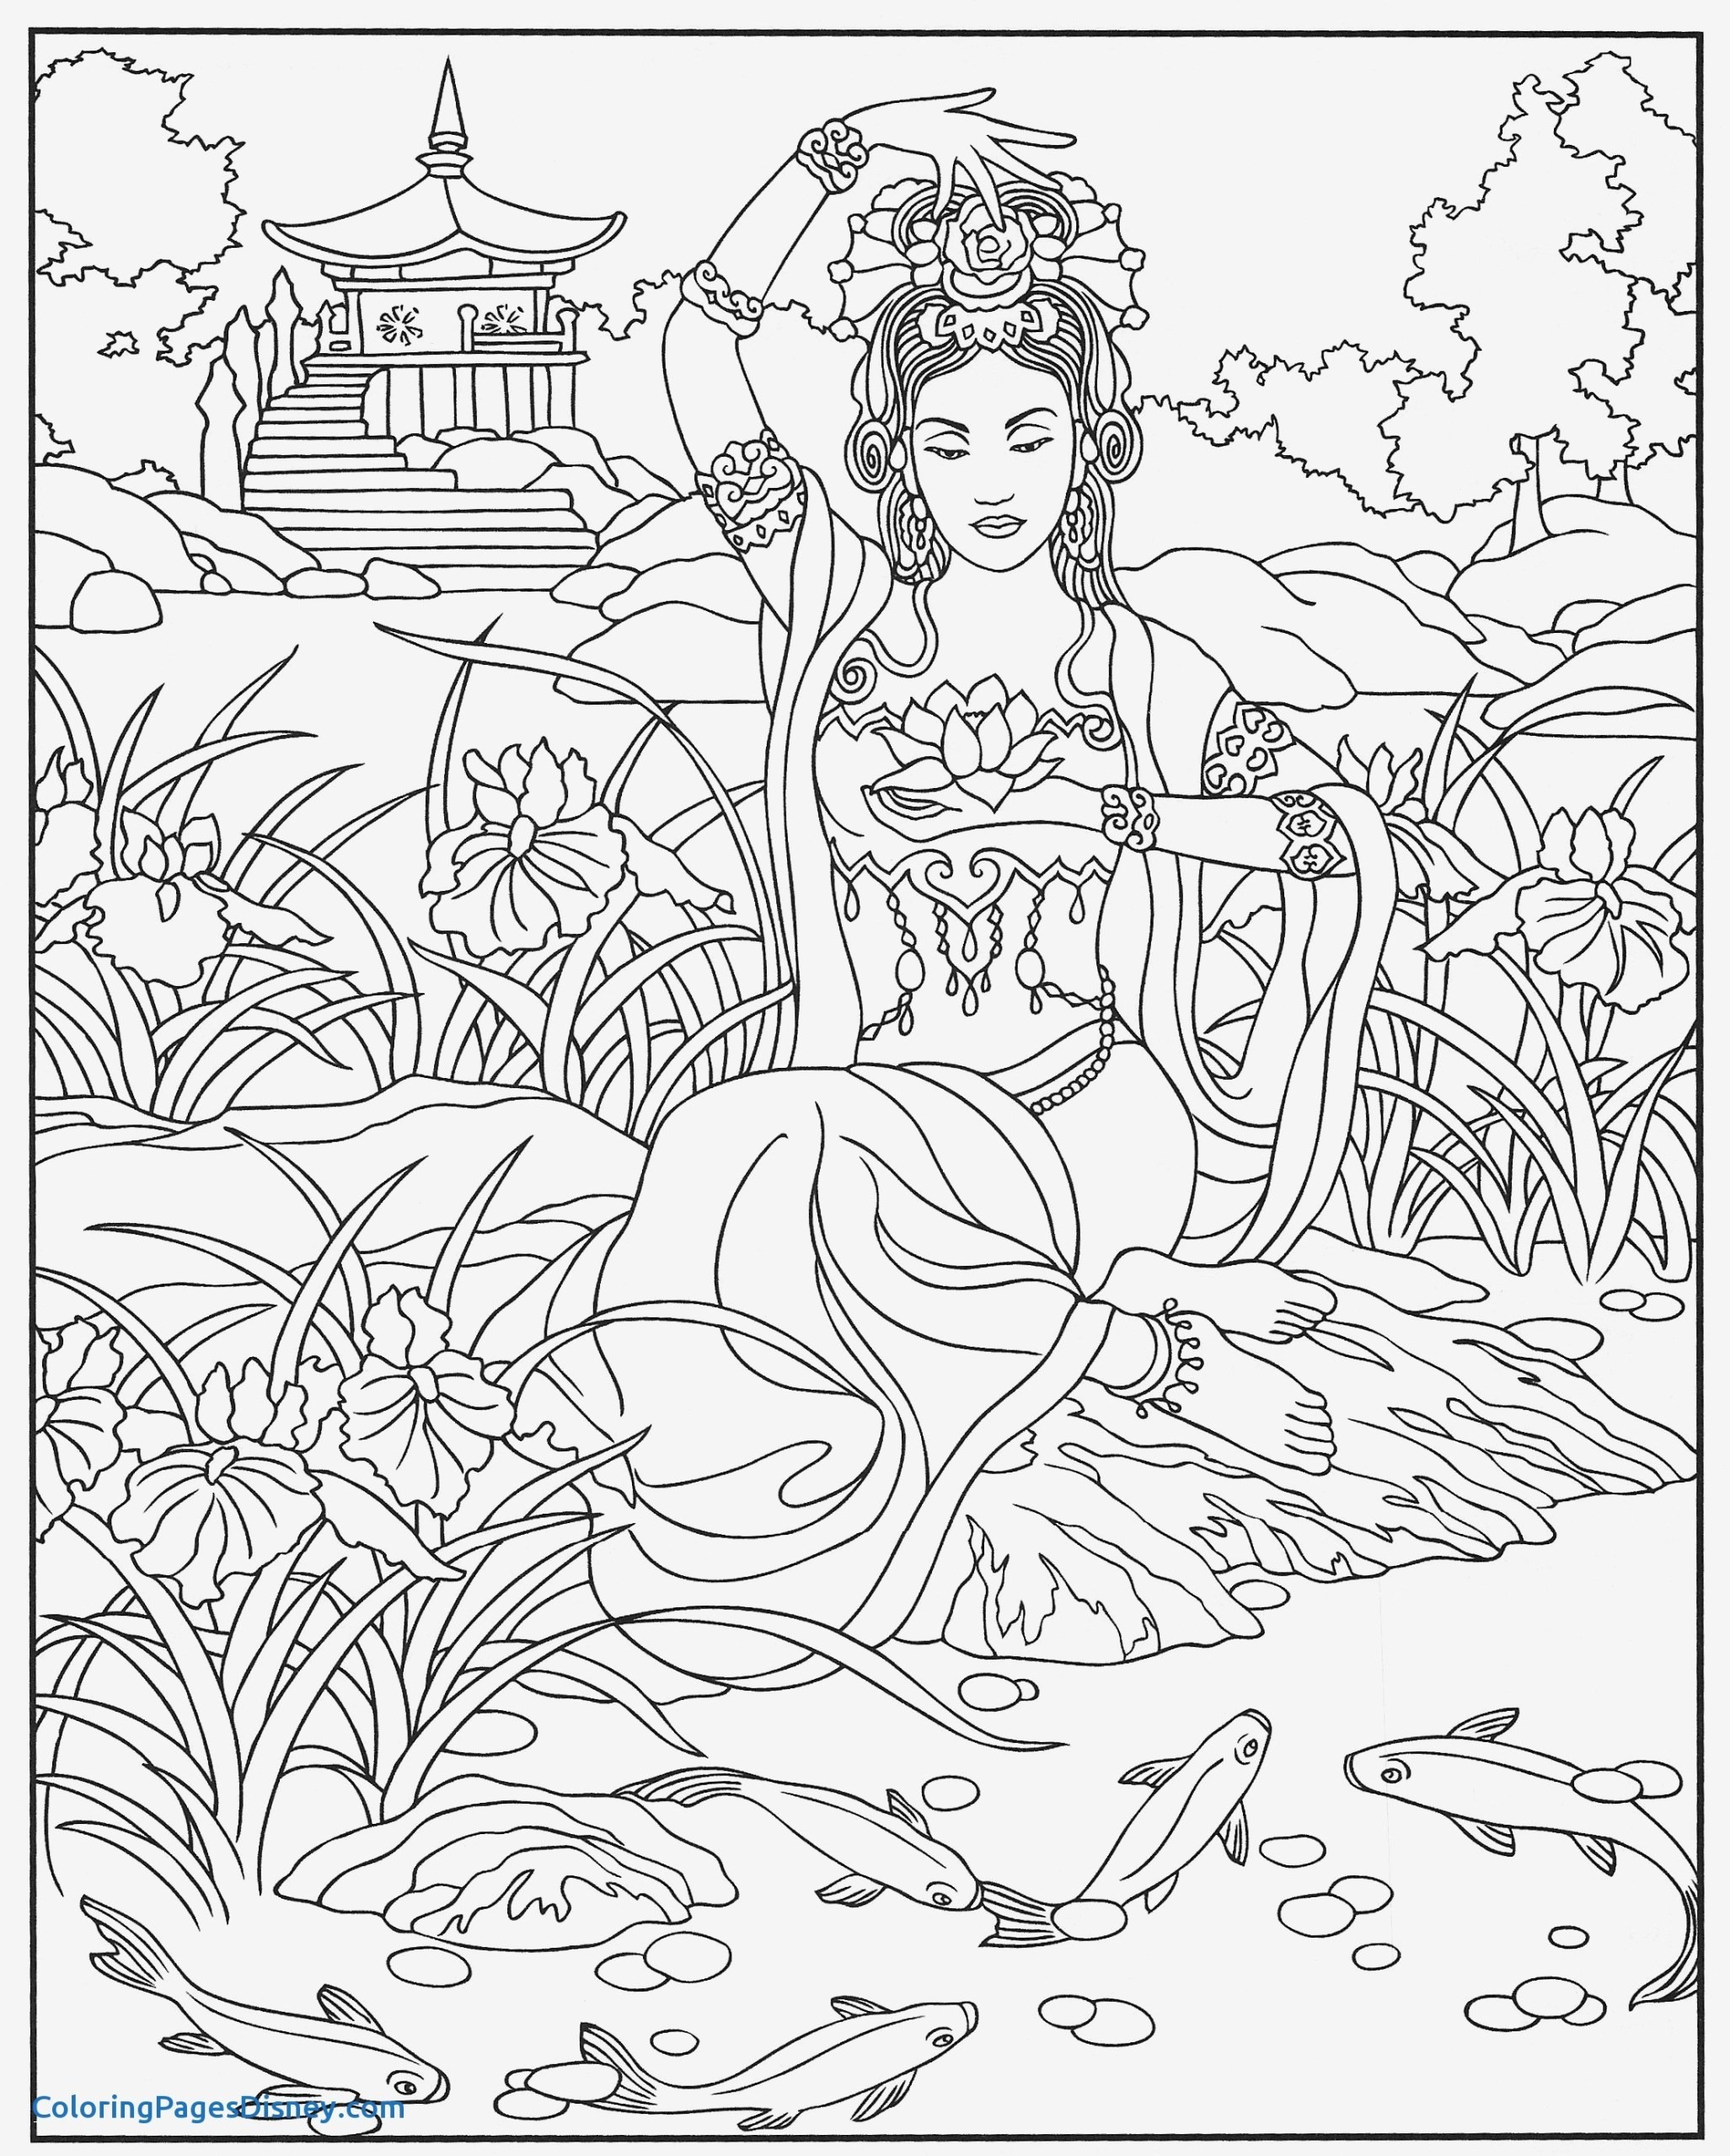 Witch Coloring Pages Lovely Cool Coloring Page Unique Witch Coloring Pages New Crayola Pages 0d